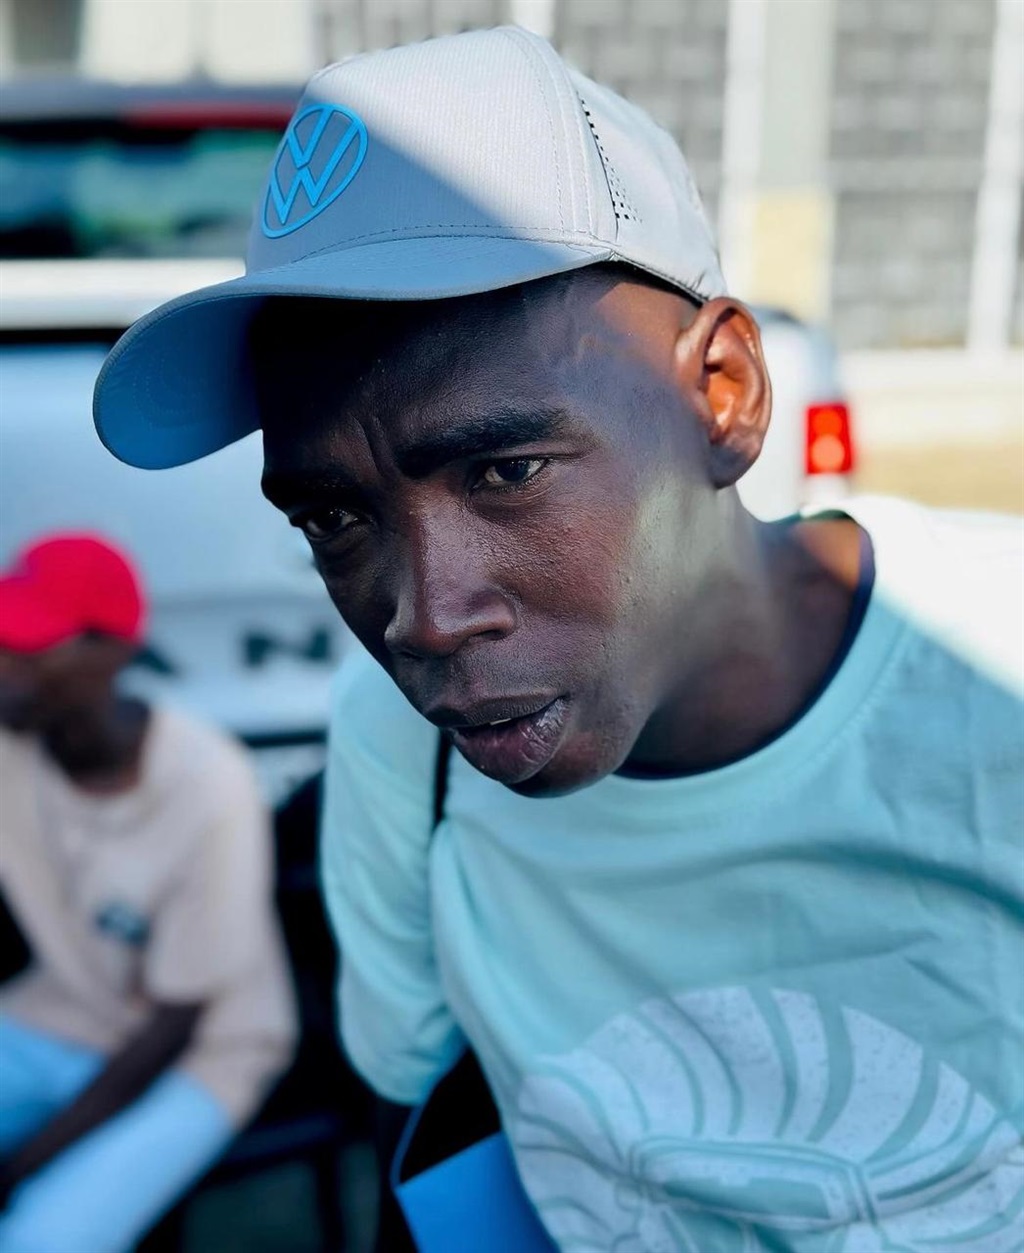 Recovering nyaope addict Mohau Louis, also known as Alostro, is changing his life for the better. 